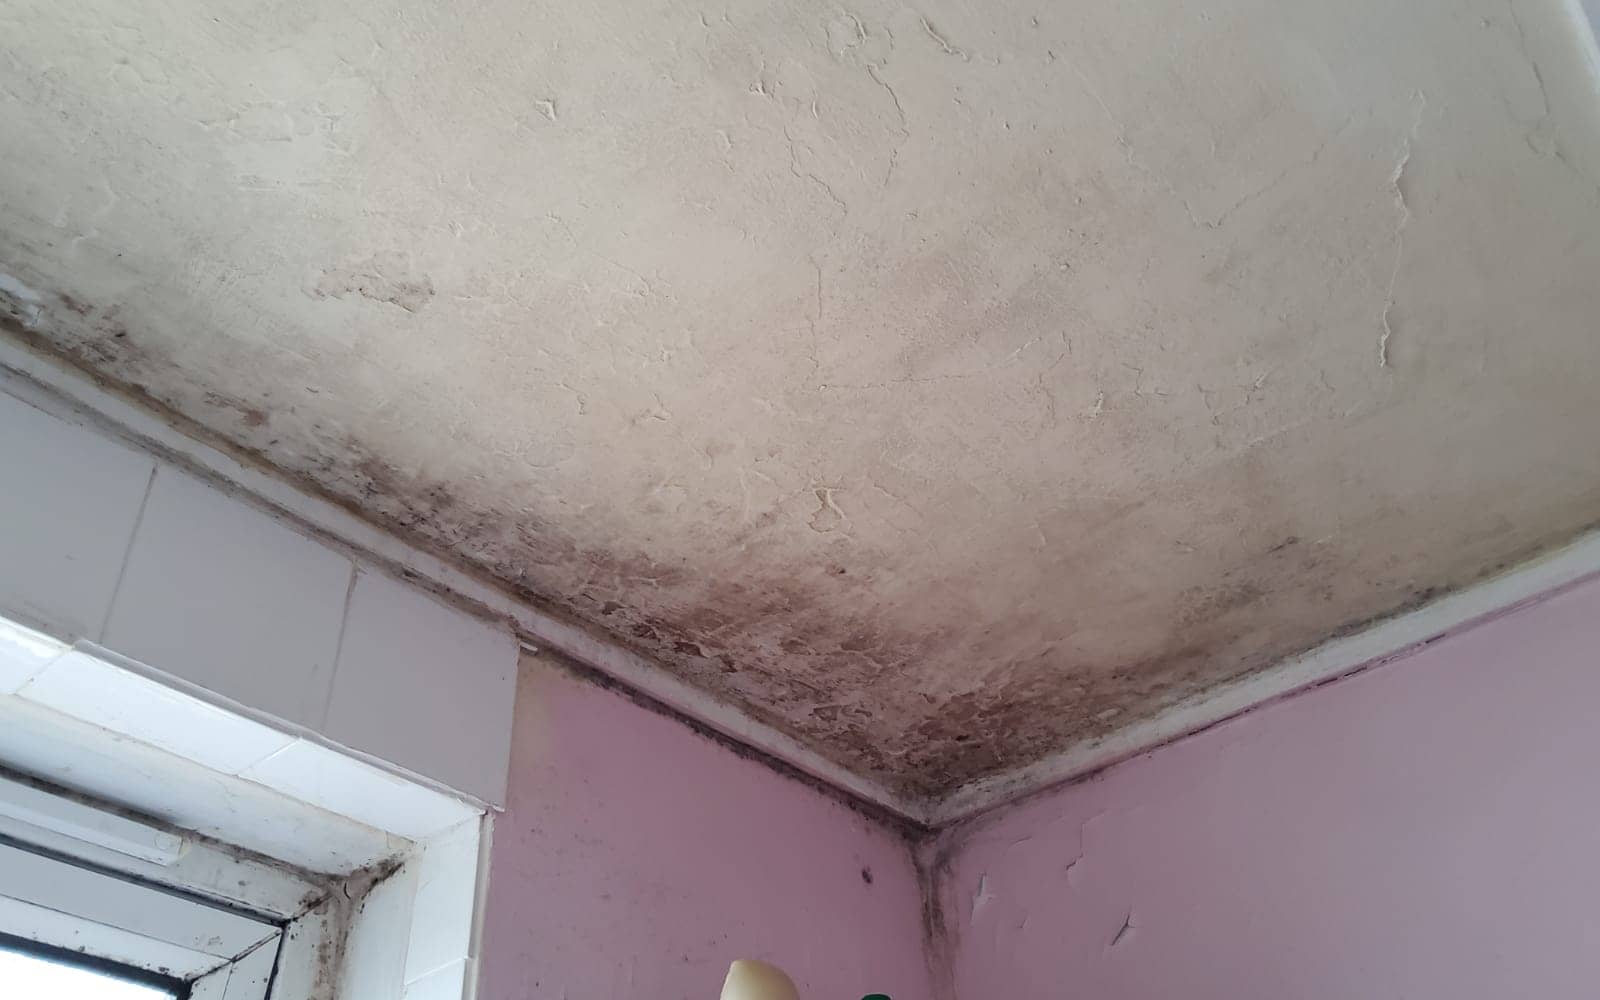 Black mould in the top corner of a room